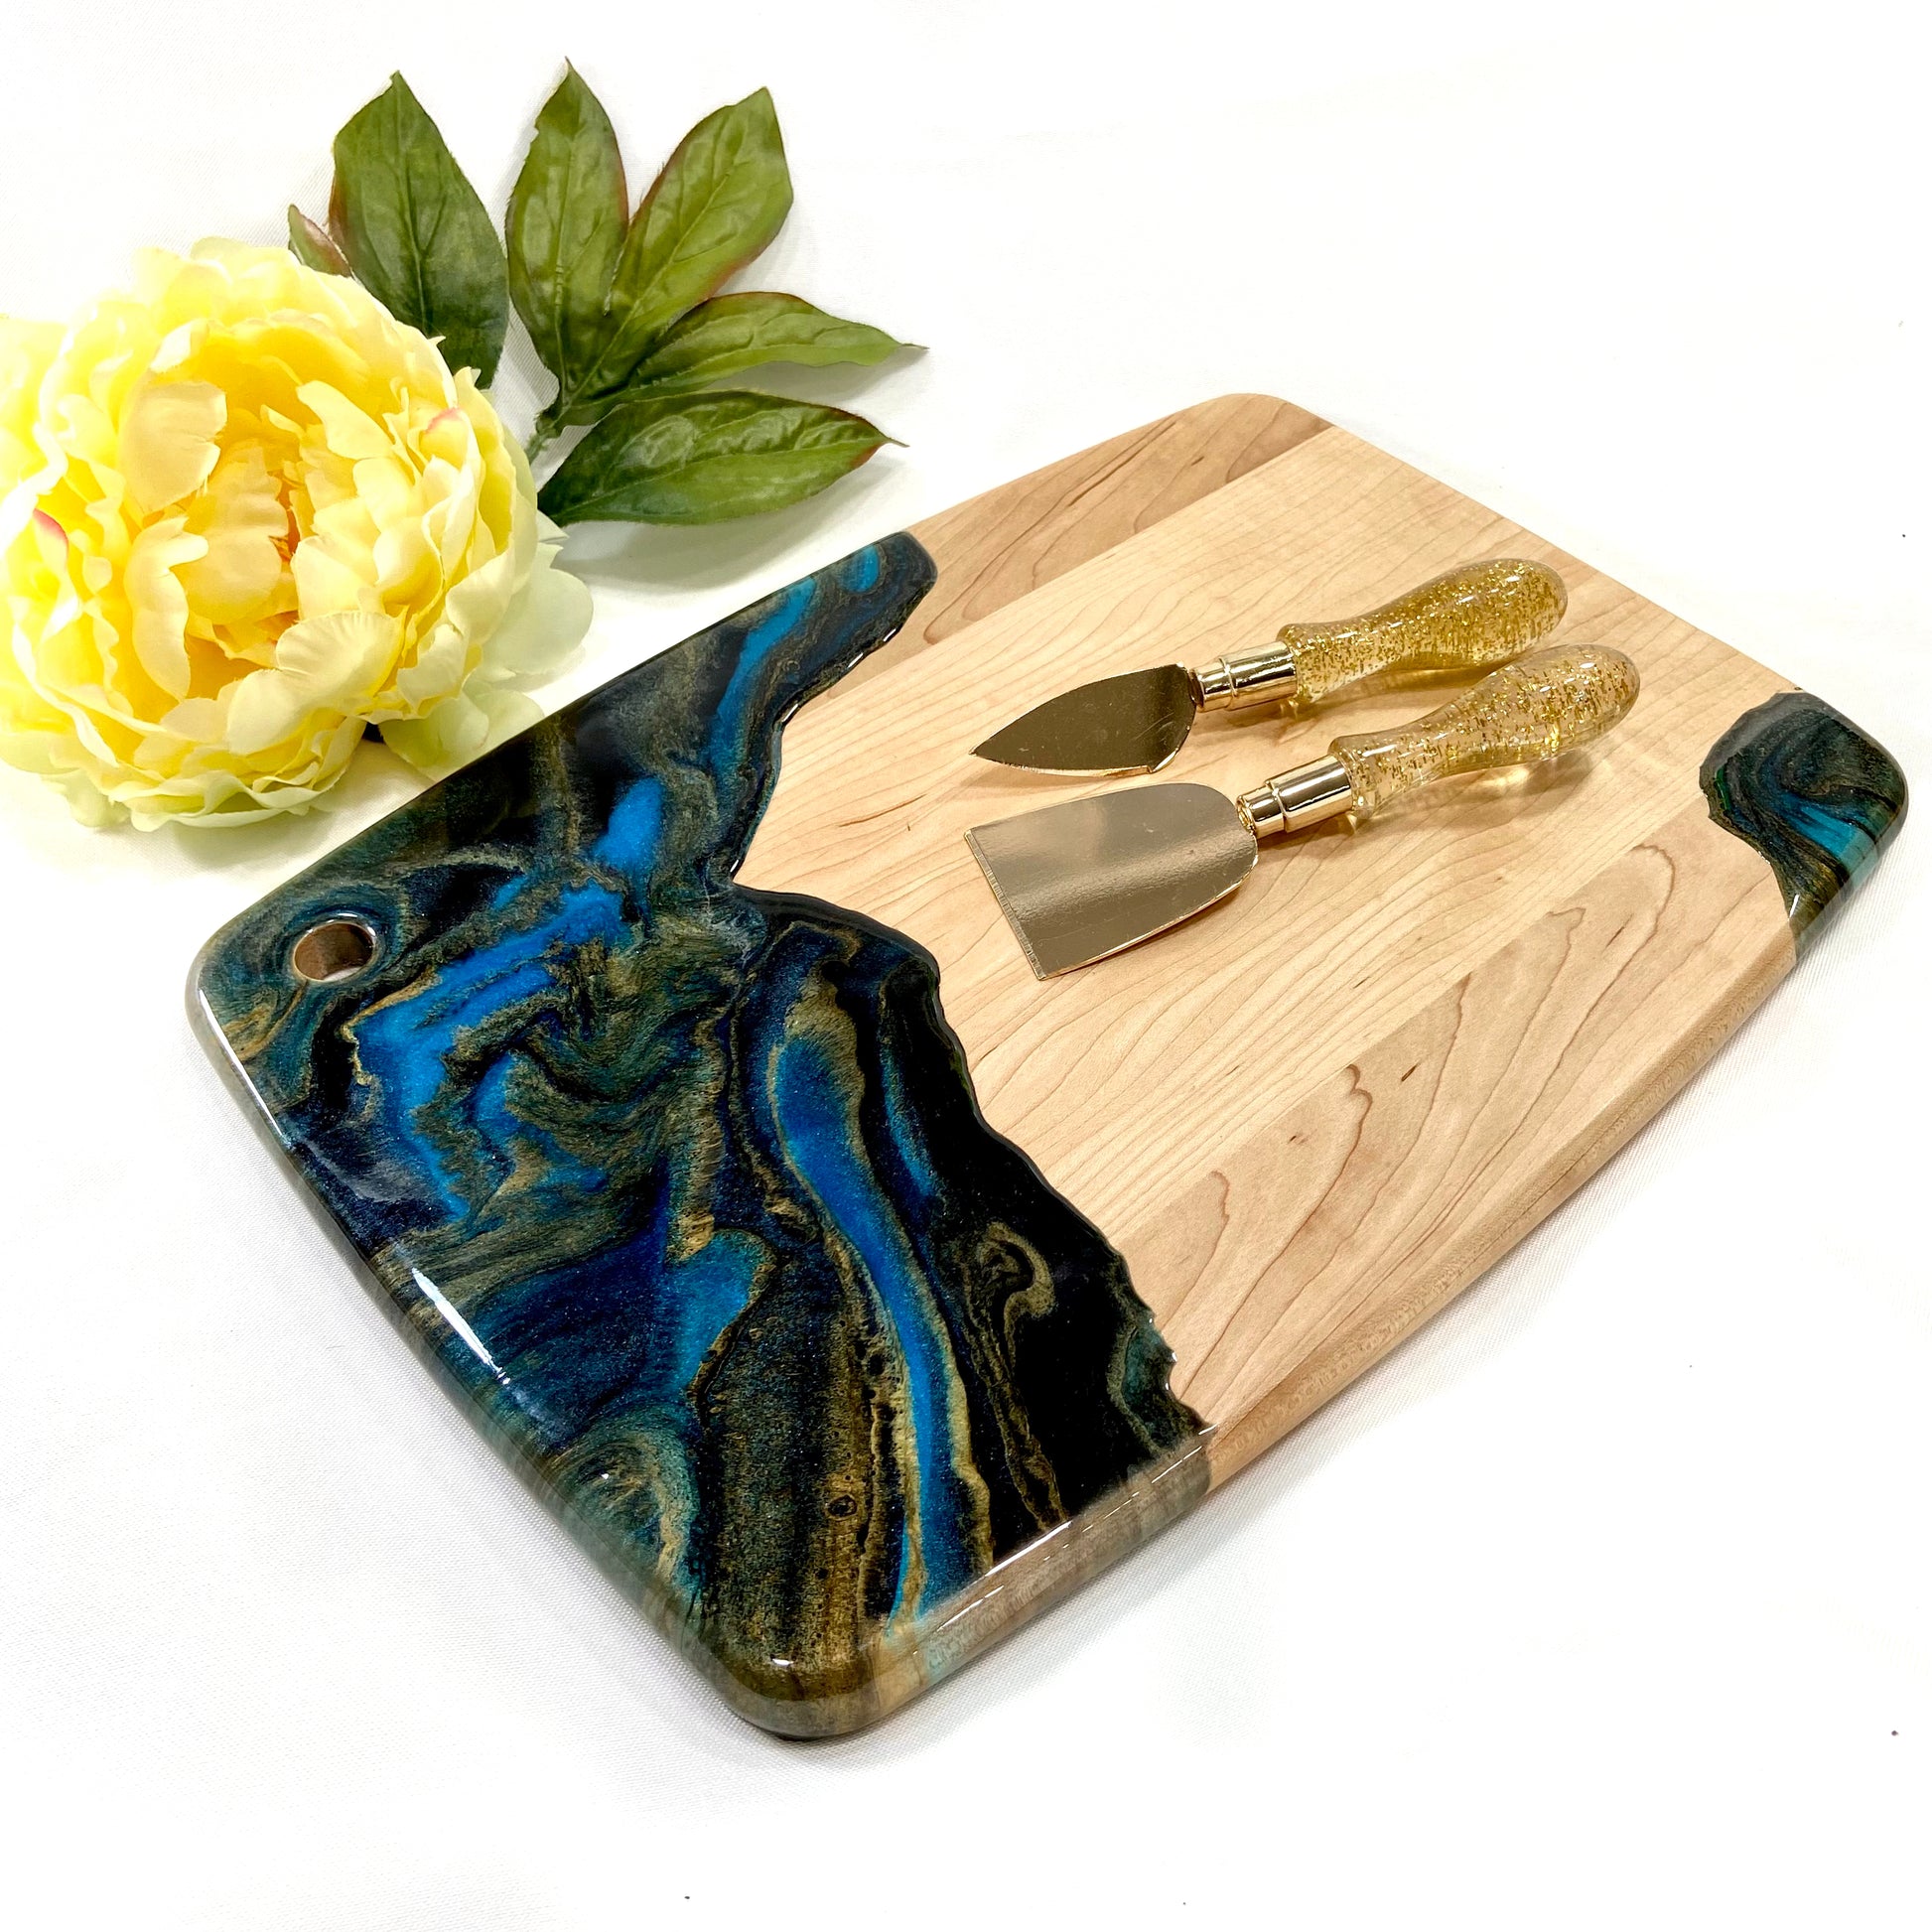 Dropship Olive Wood Coaster Set With Holder -7 Pcs to Sell Online